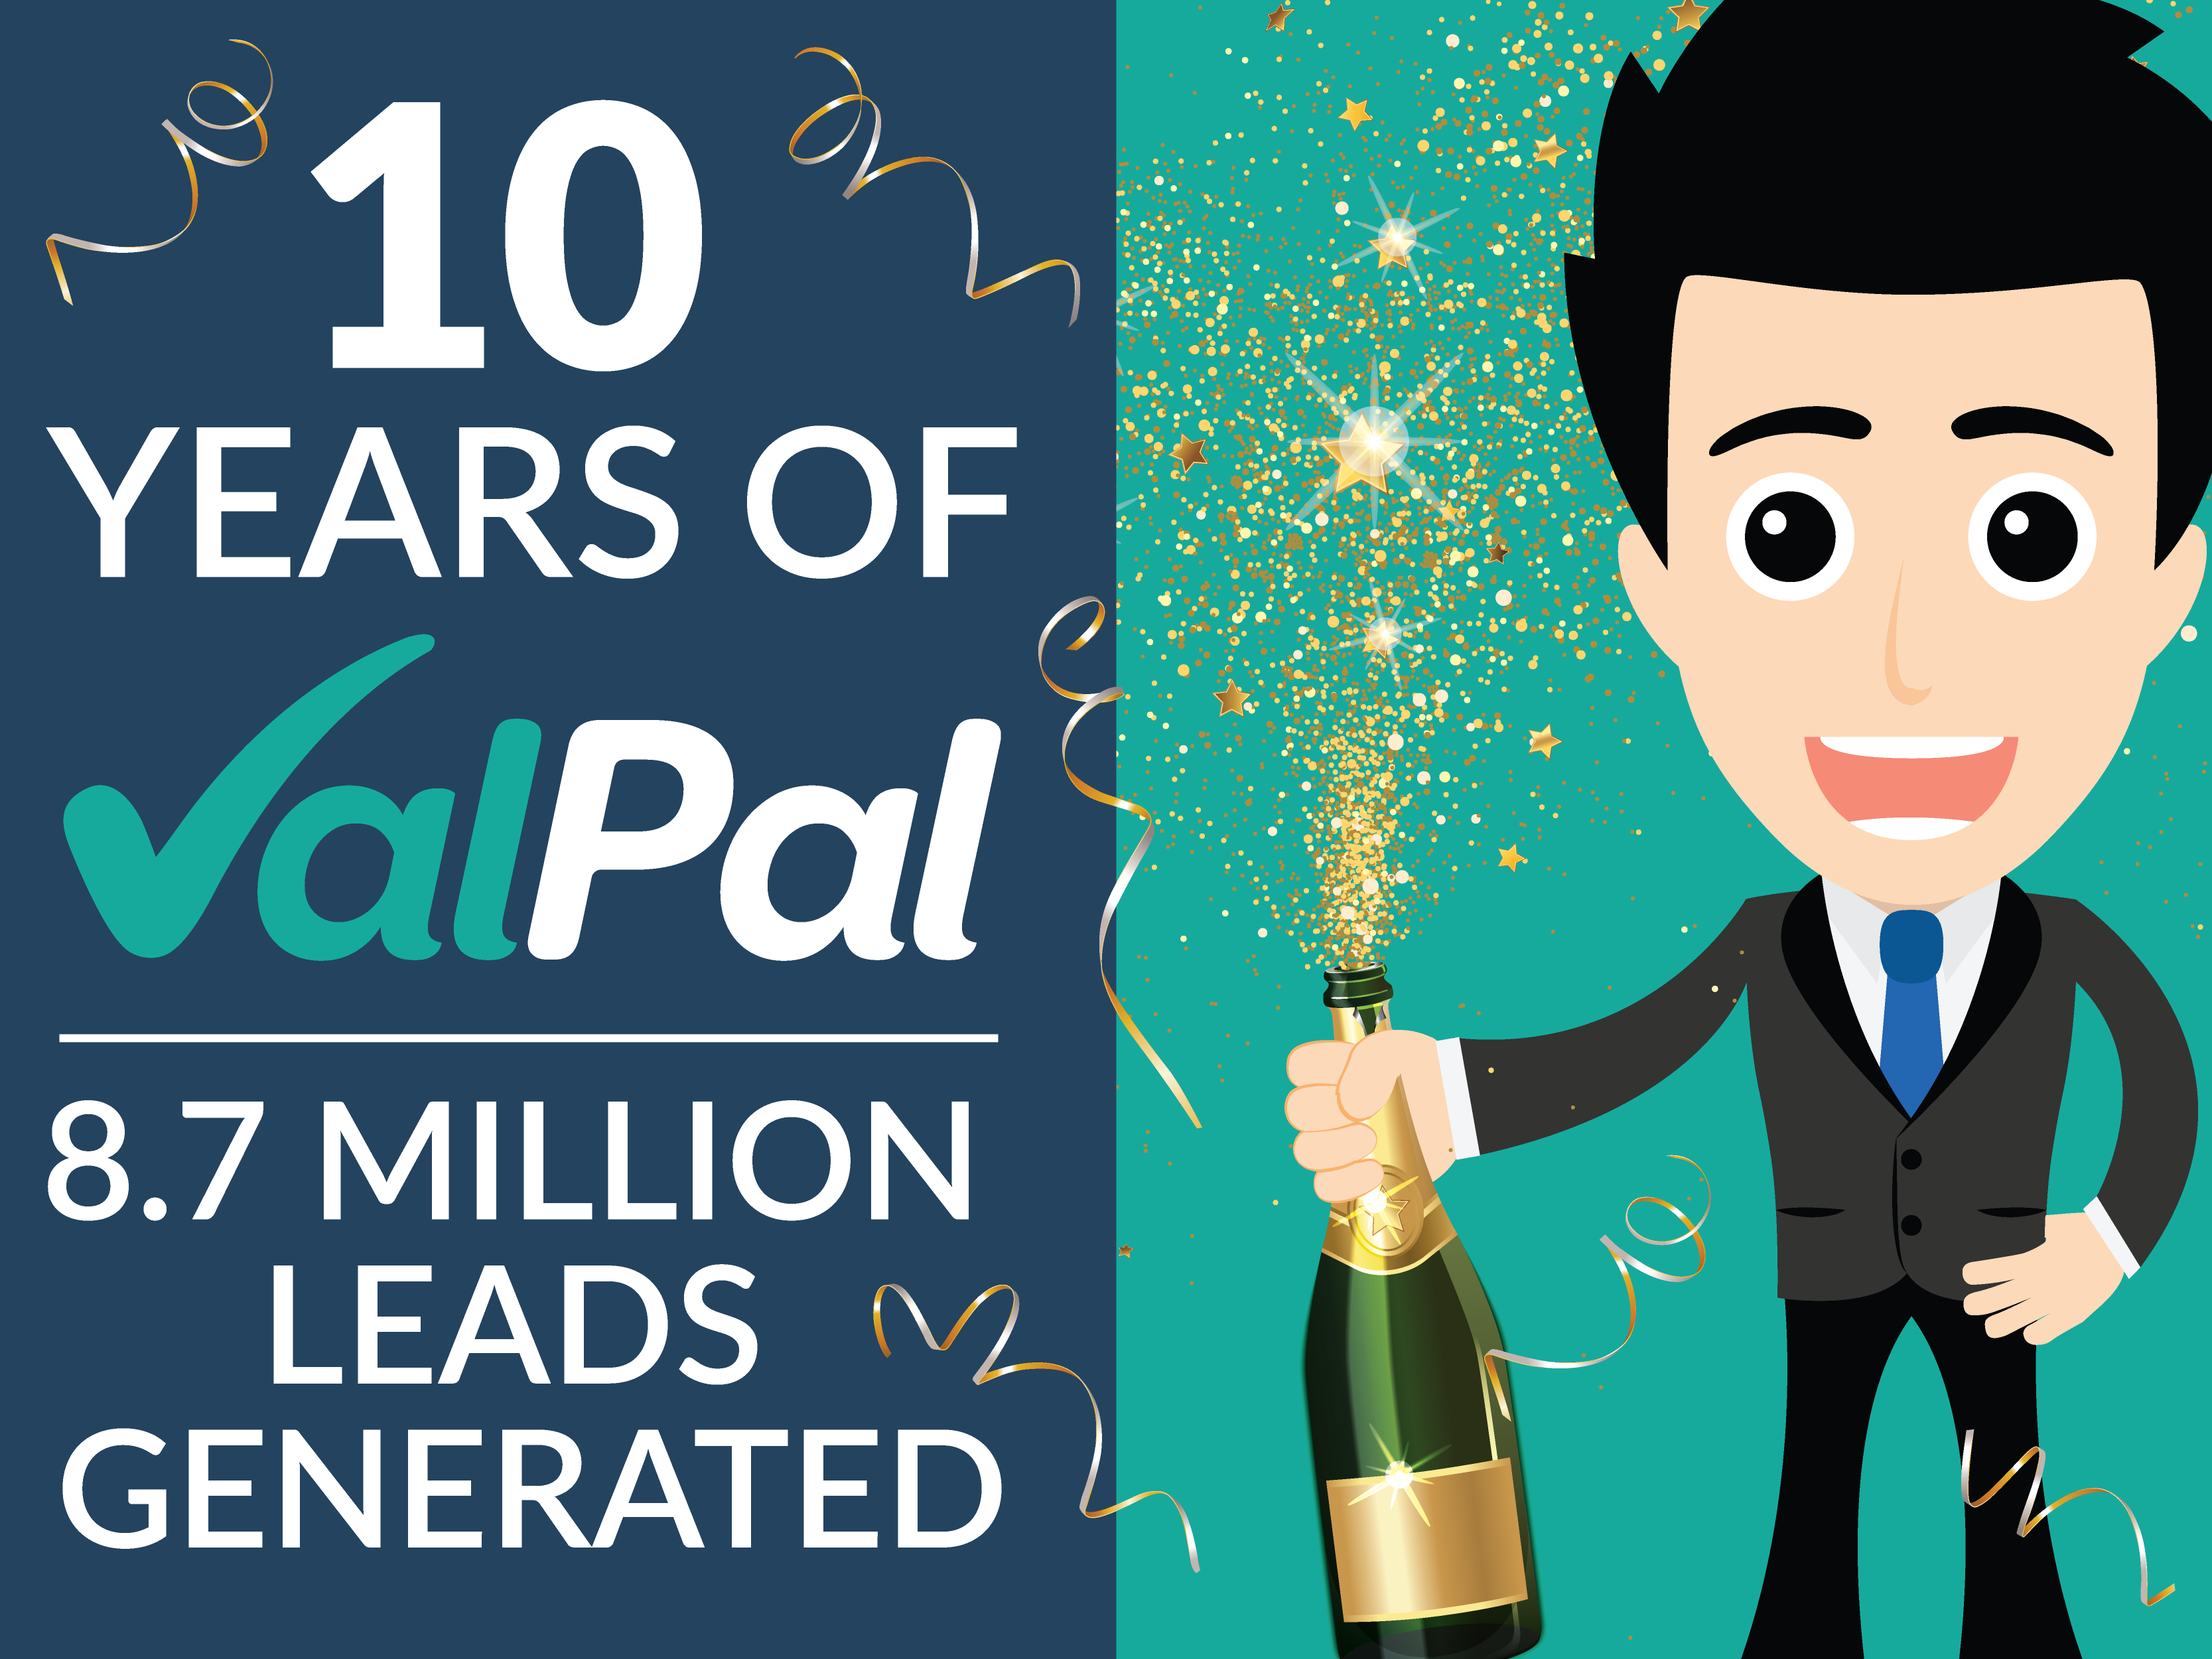 8.7m leads later, The ValPal Network celebrates 10 years in business